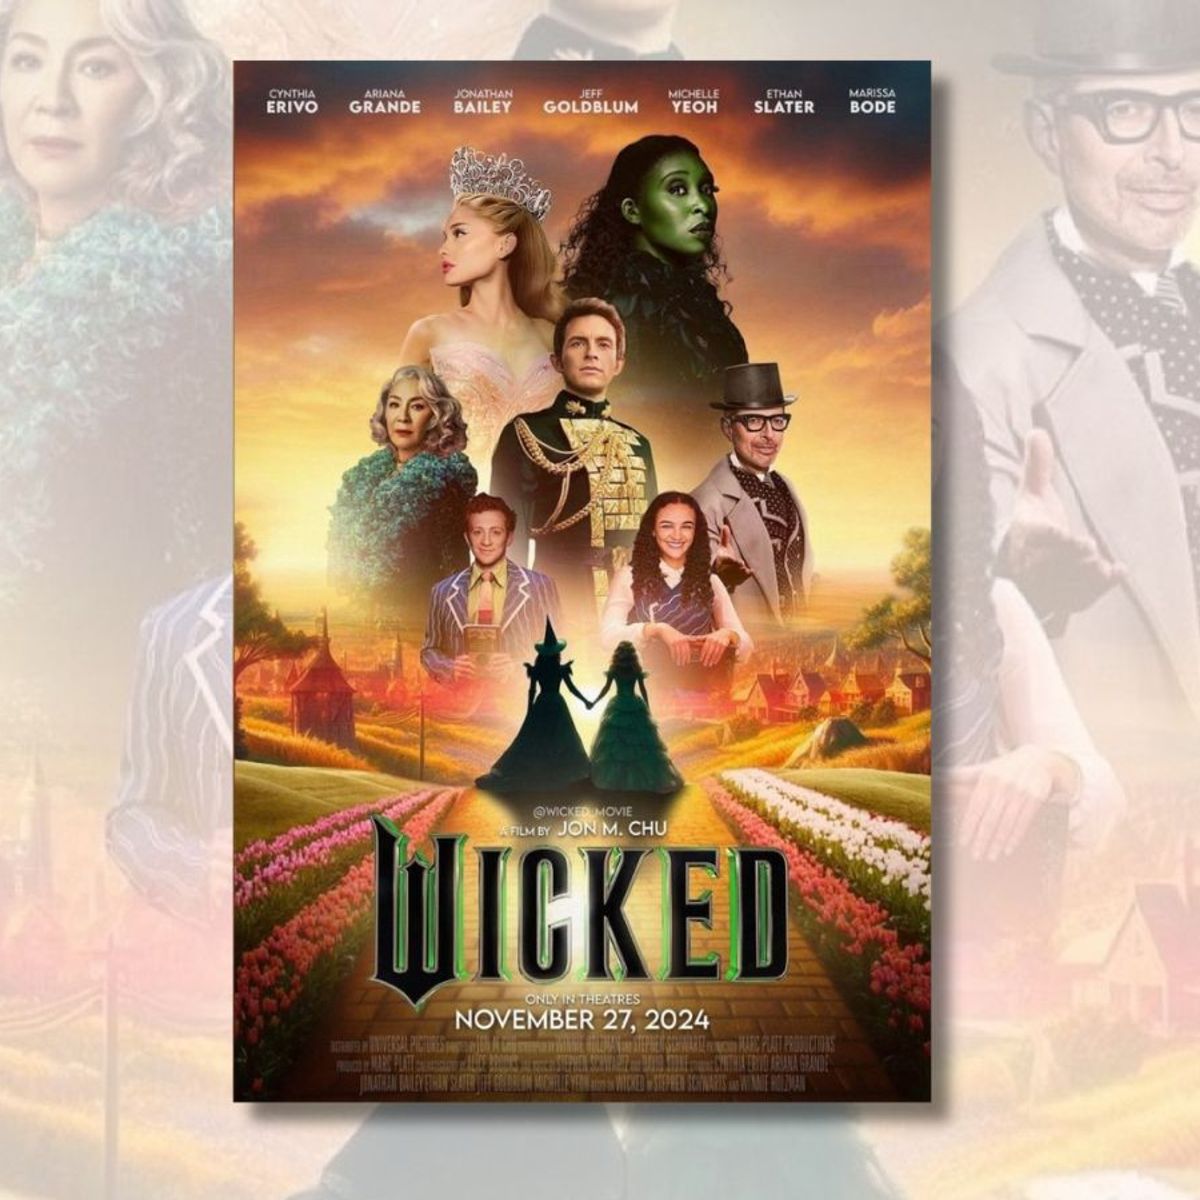 Wicked pictures com